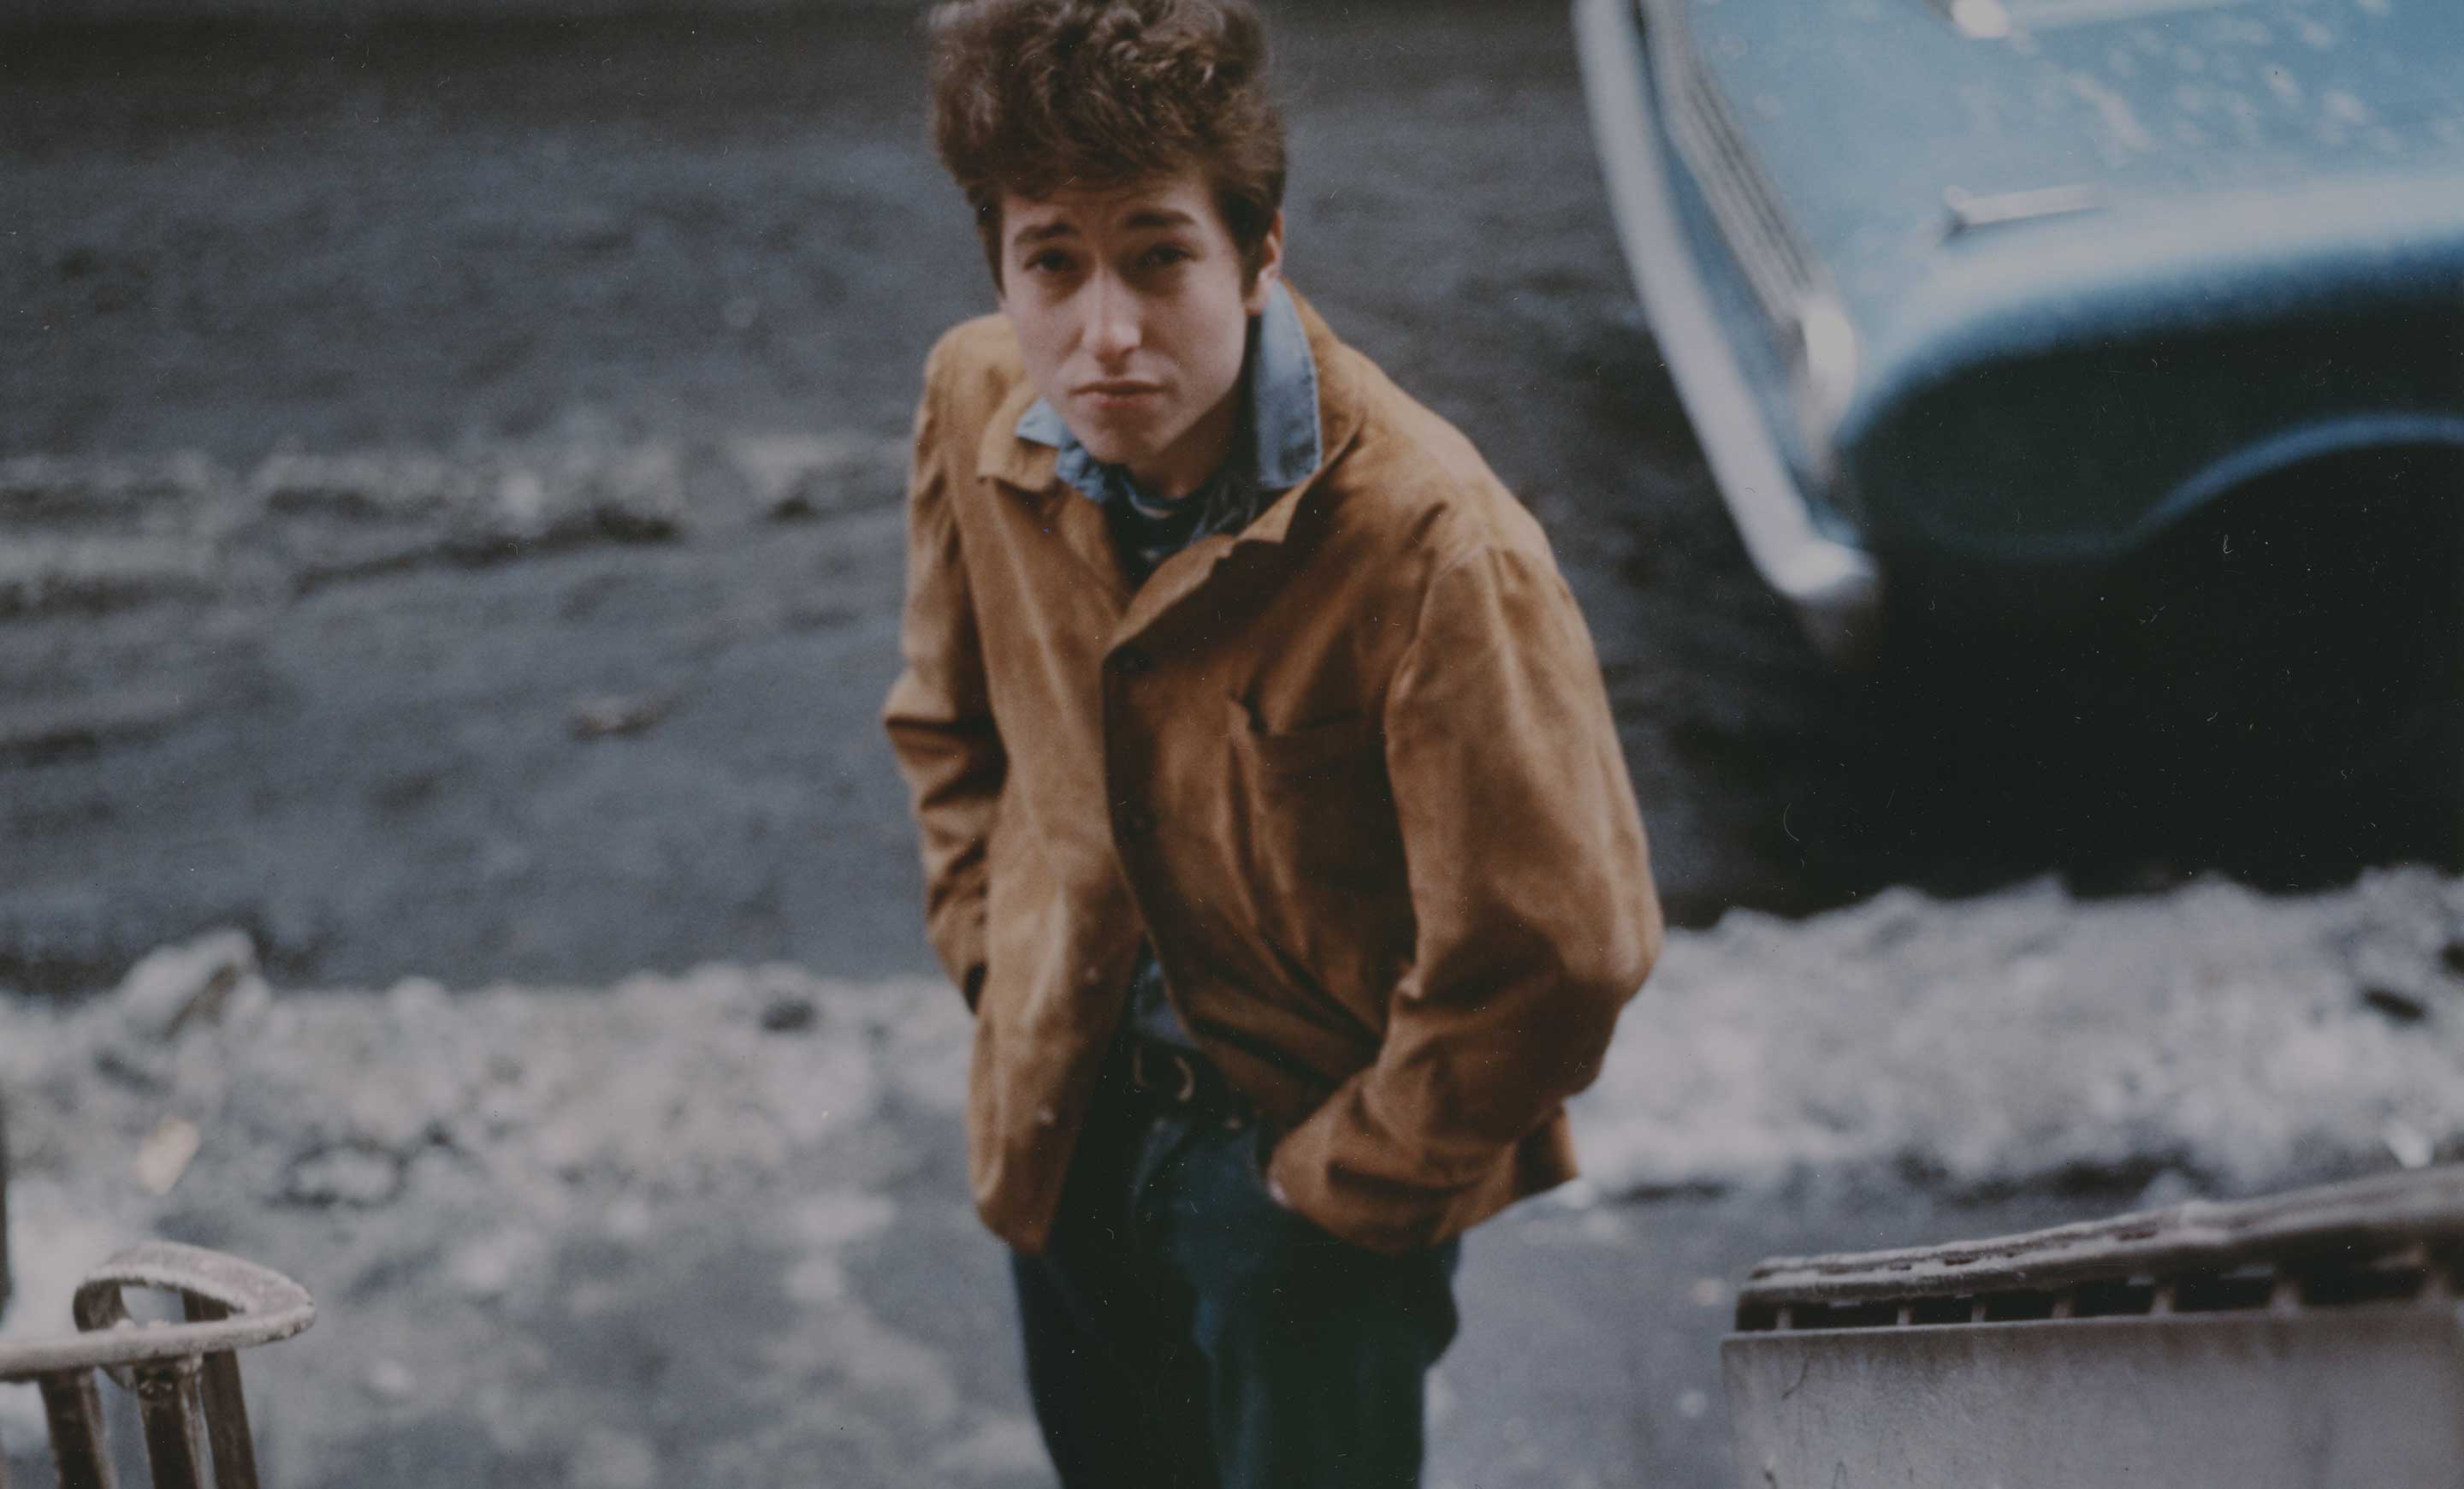 quotthe-voice-of-generationquot-it-s-bob-dylan-1962-1966-dylan